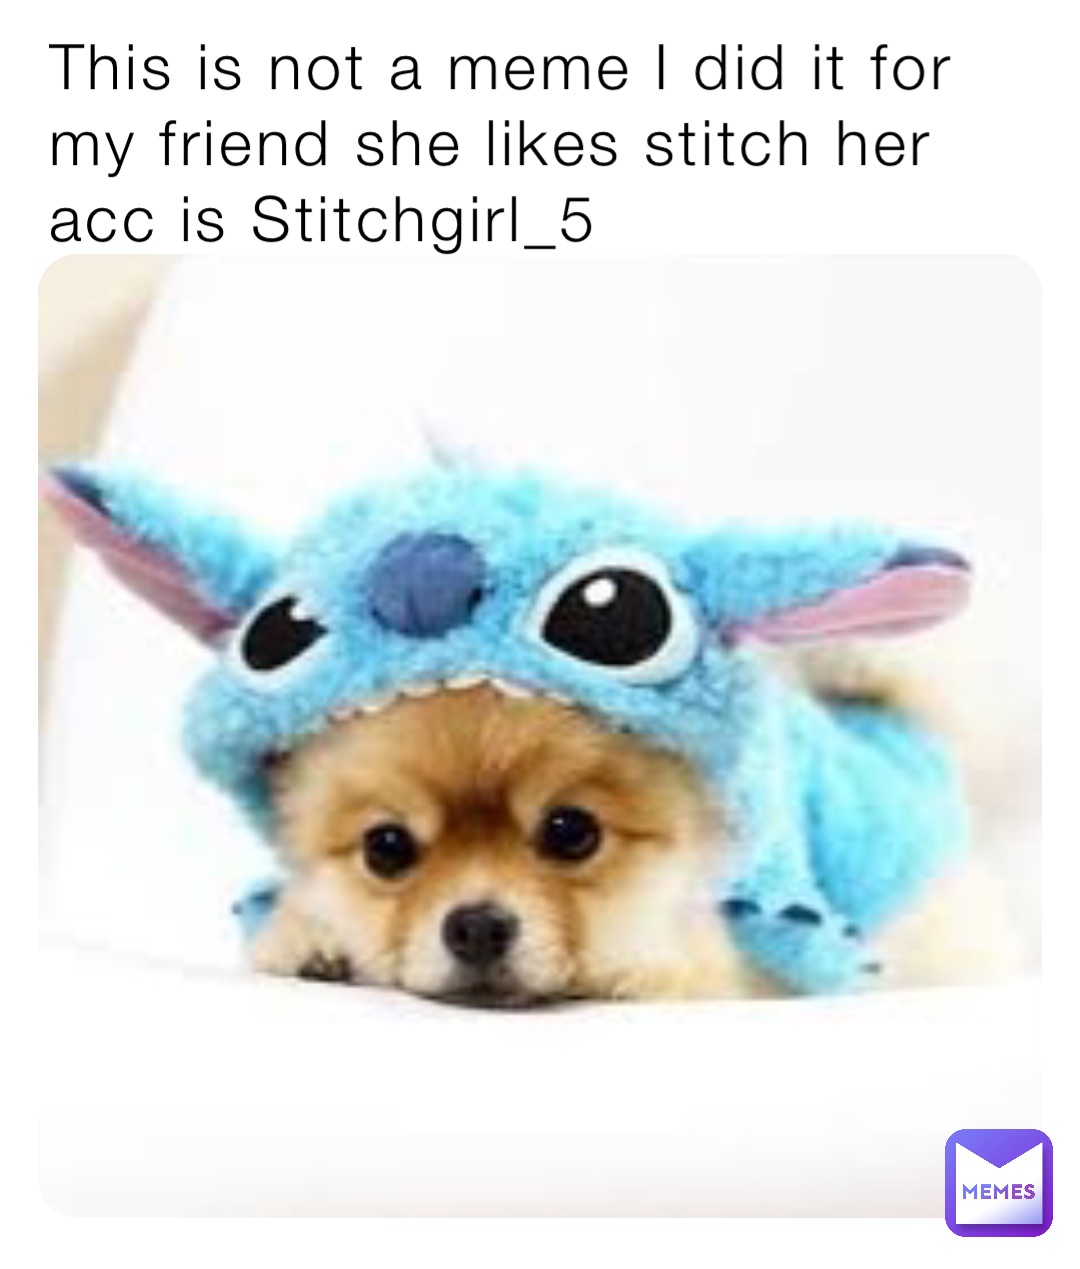 This is not a meme I did it for my friend she likes stitch her acc is Stitchgirl_5